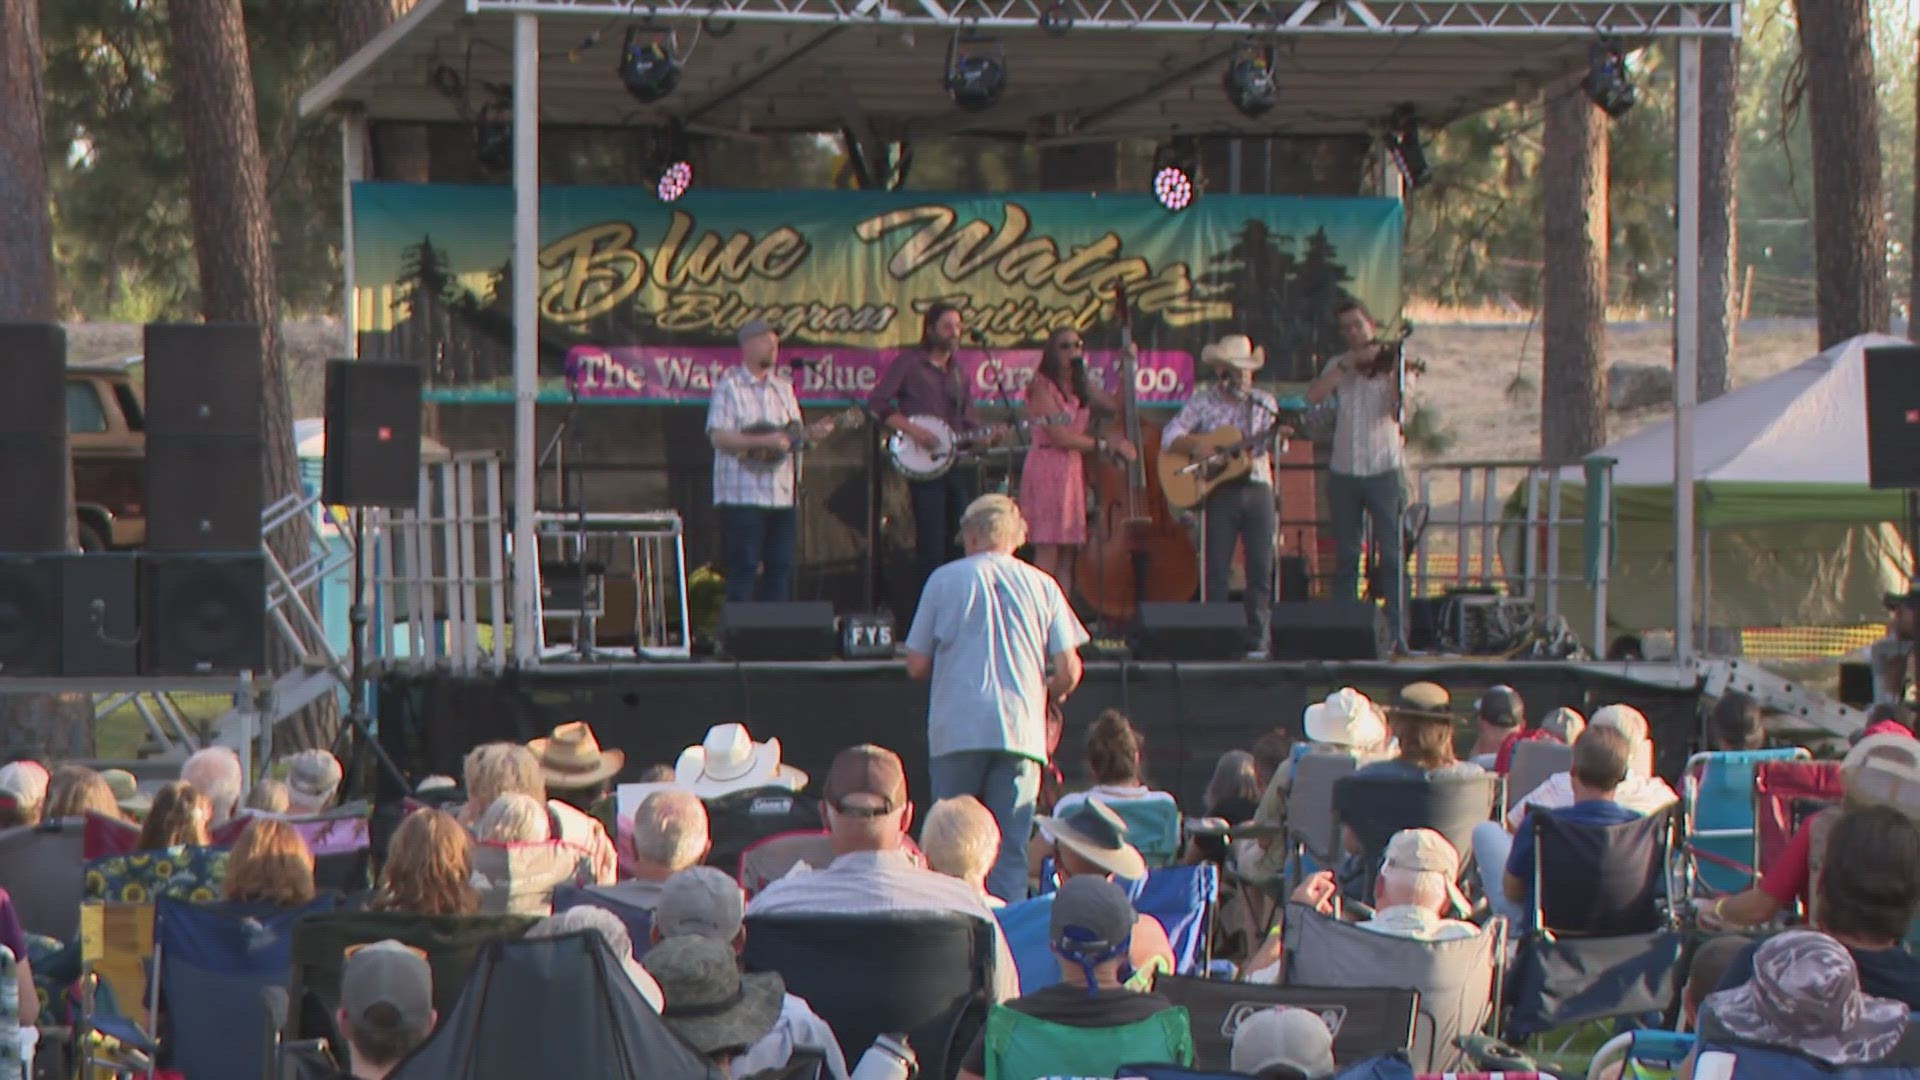 Annual Blue Waters Bluegrass Festival brings hundreds to Medical Lake's